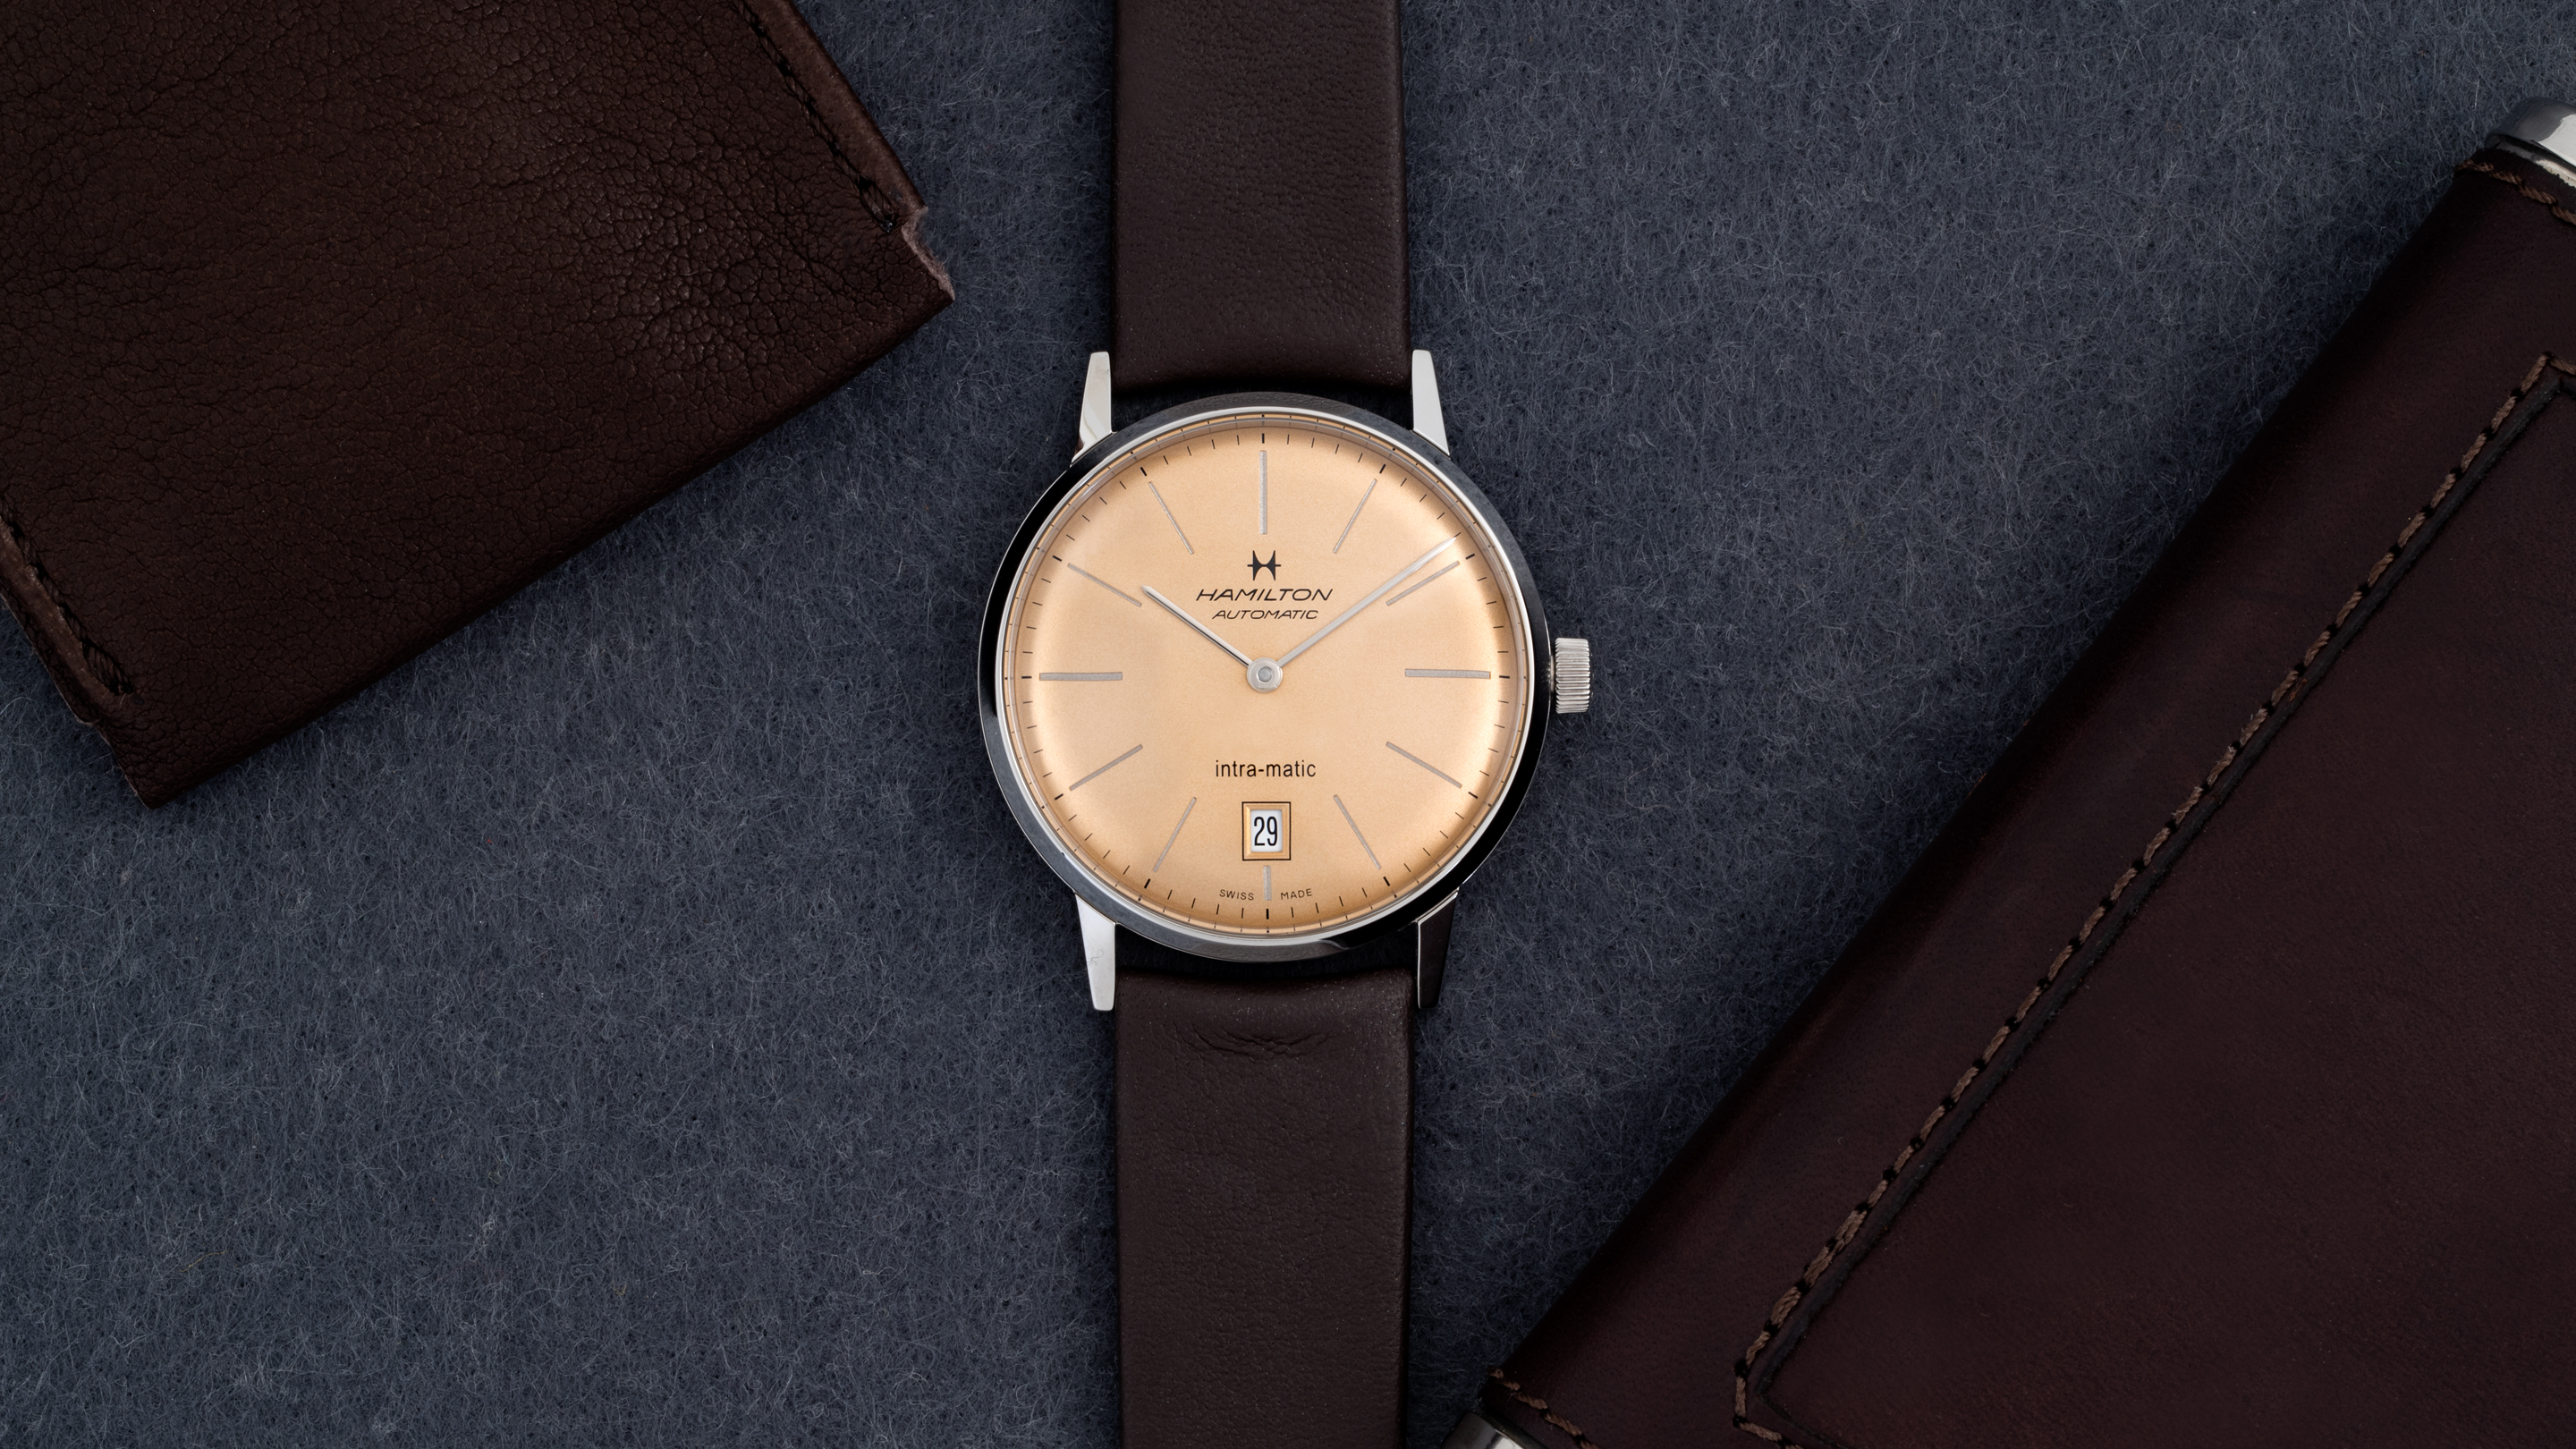 The Value Proposition: The Hamilton Intra-Matic 38mm 'Dress Watch 